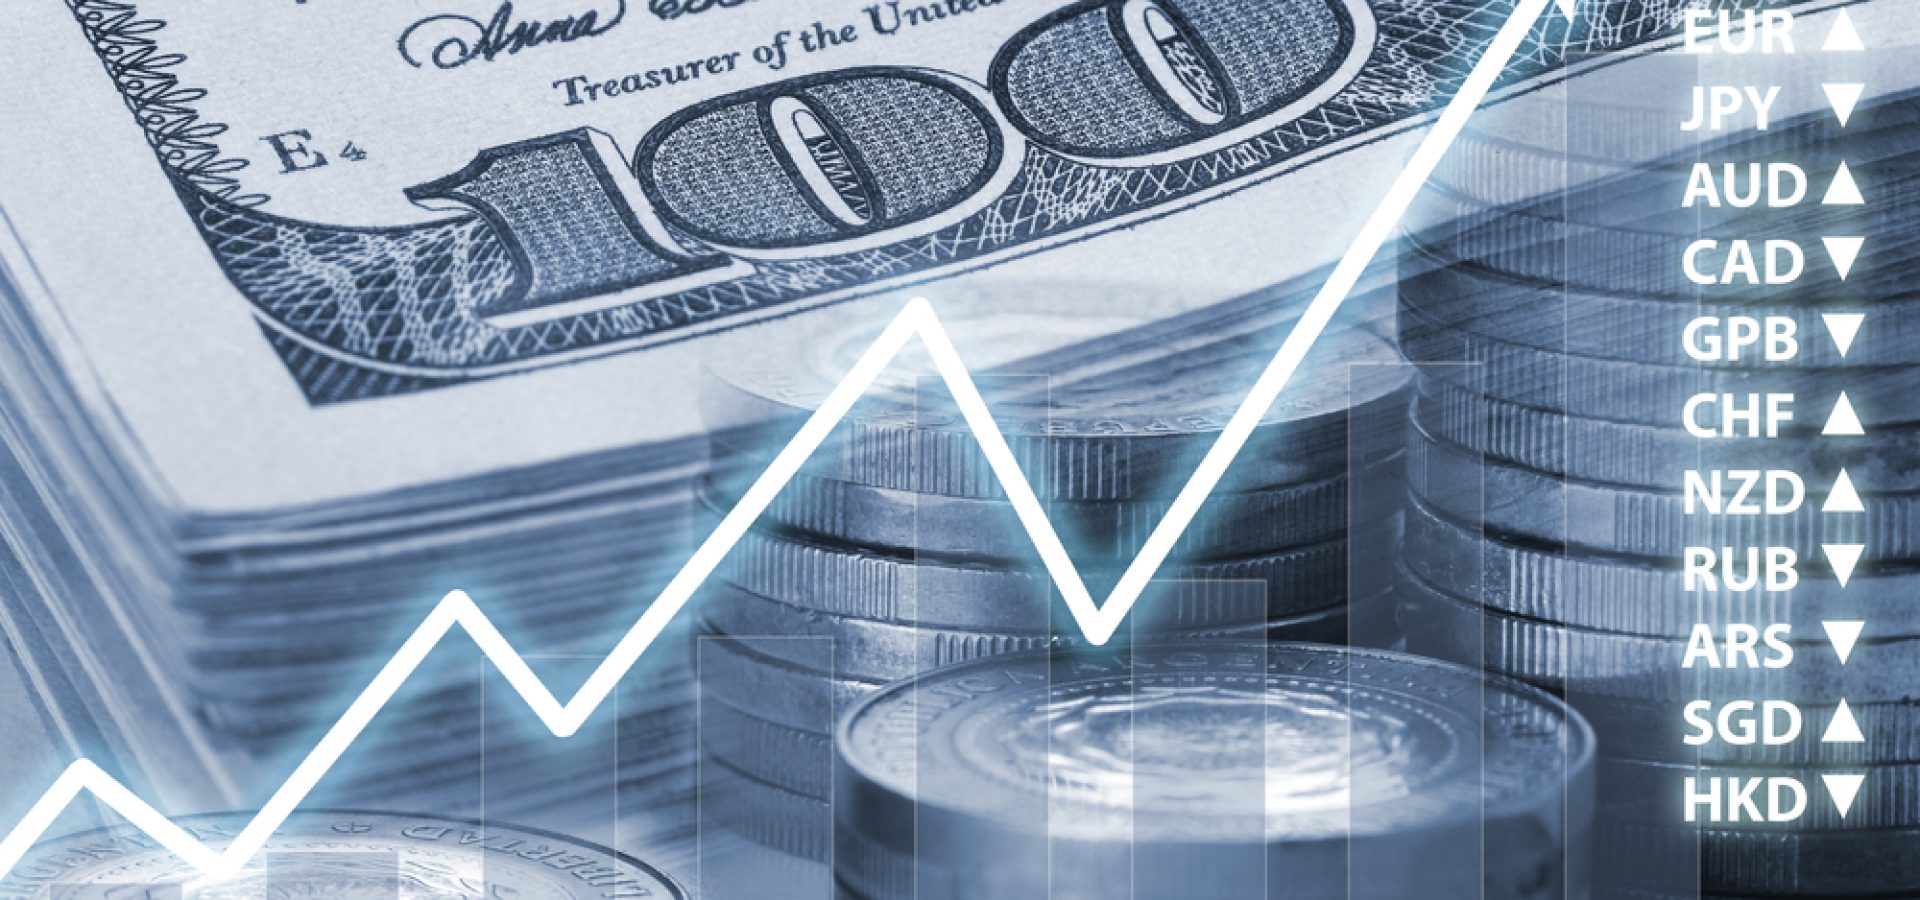 Several Factors Helped to Boost U.S. Dollar